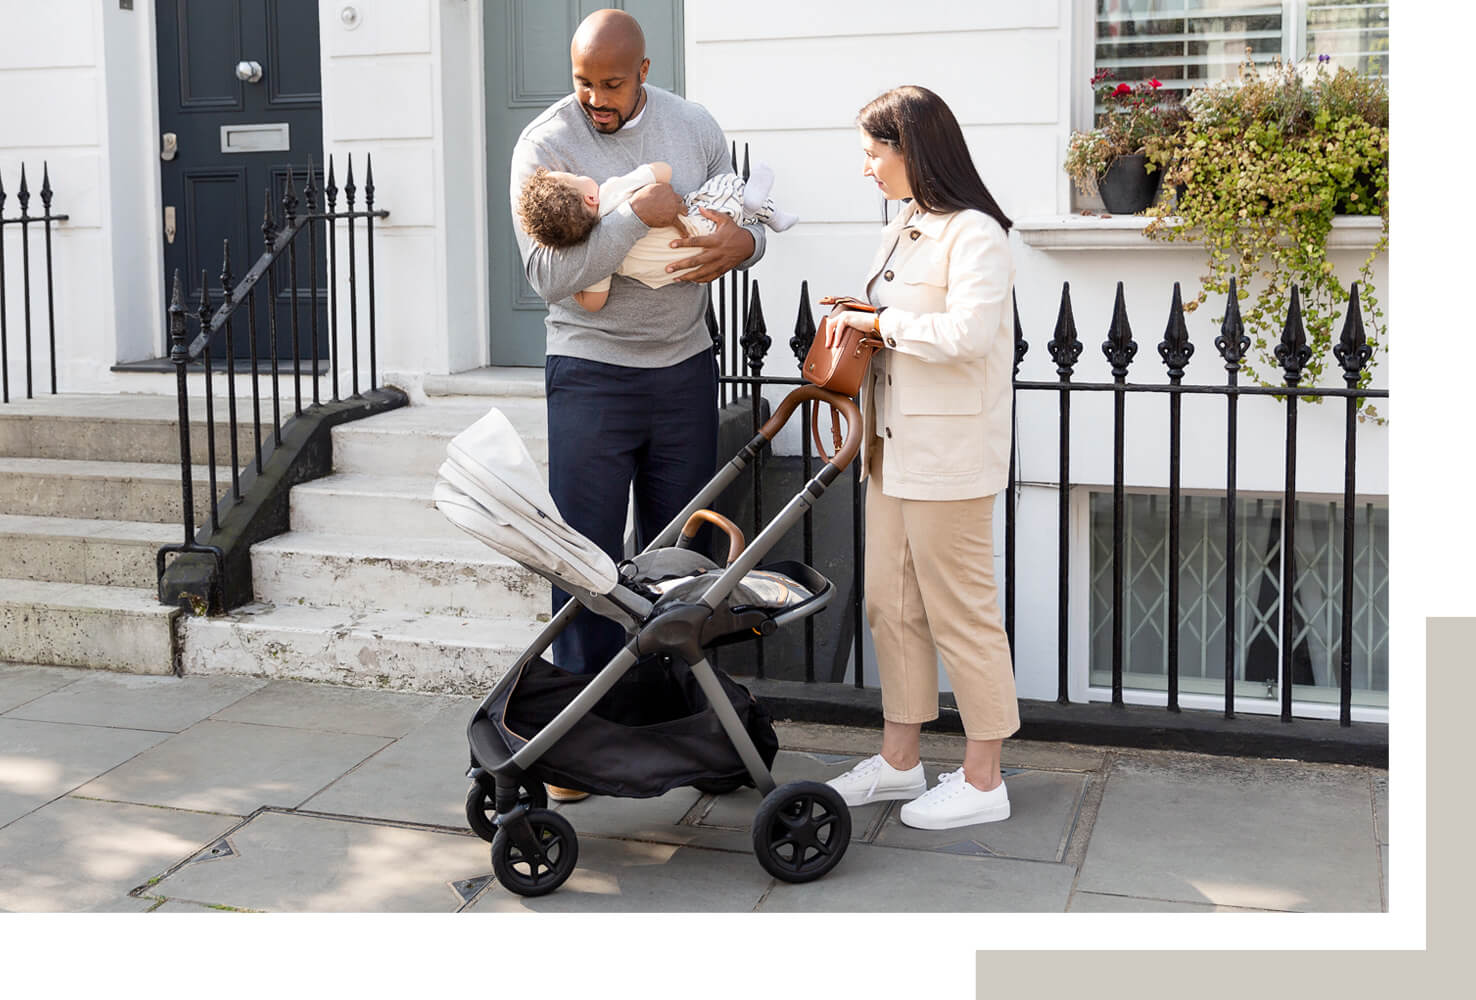 Joie finiti pram in light gray reclined with mom and dad while dad is placing baby in pram. 